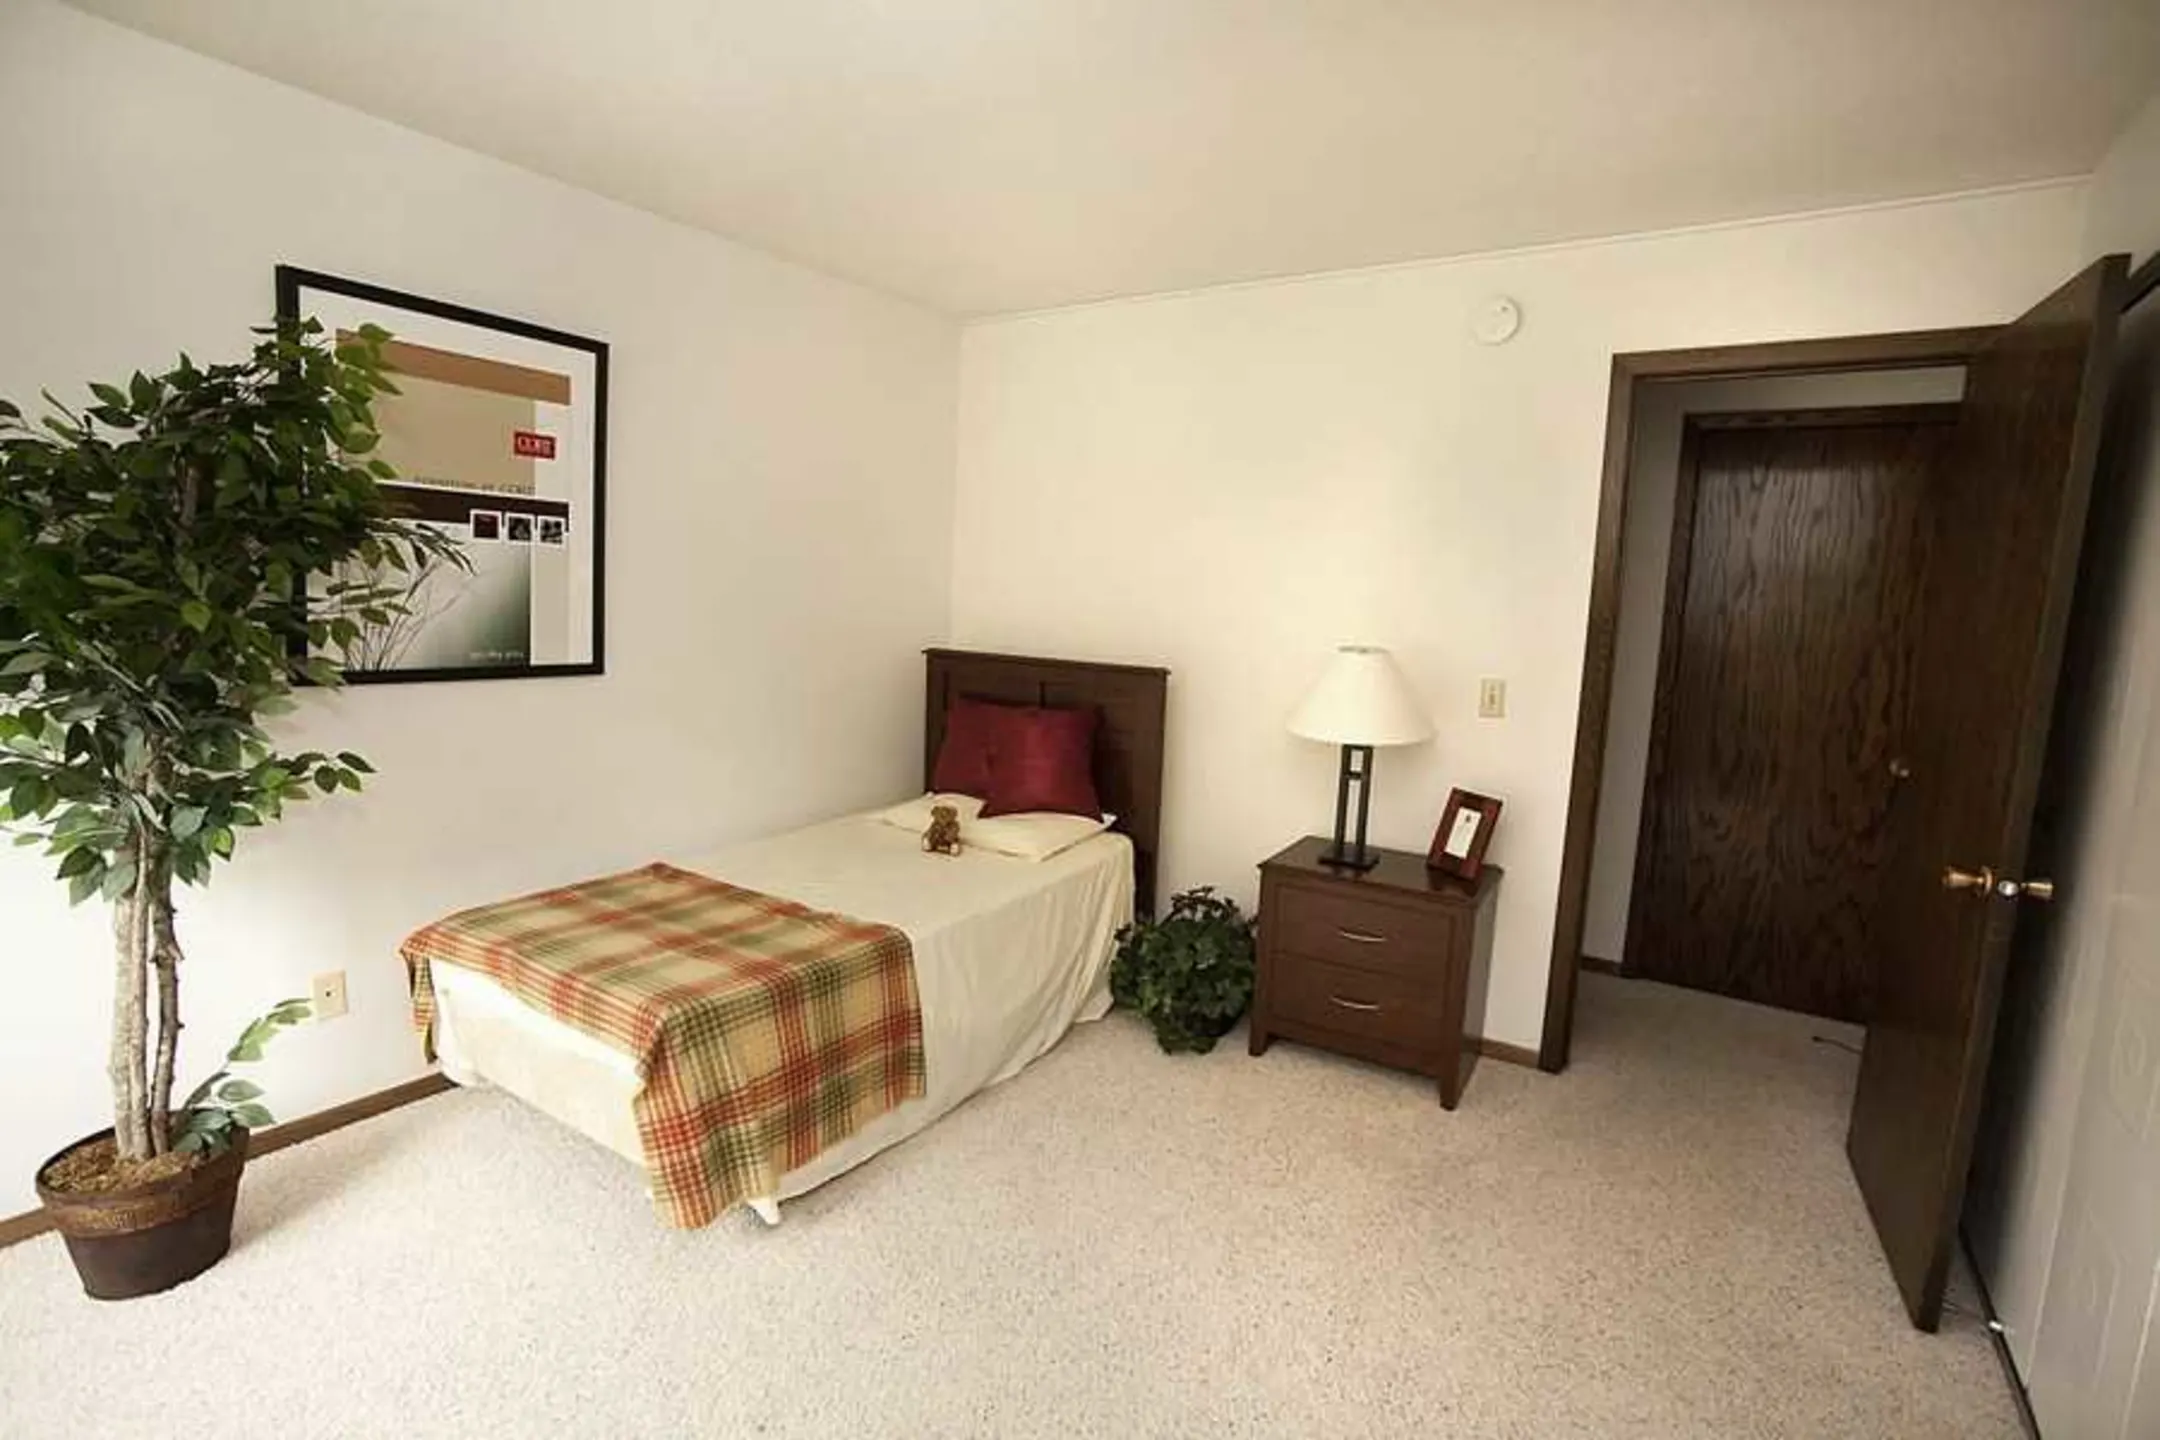 Bedroom - Twin Lake North Apartments - Brooklyn Center, MN